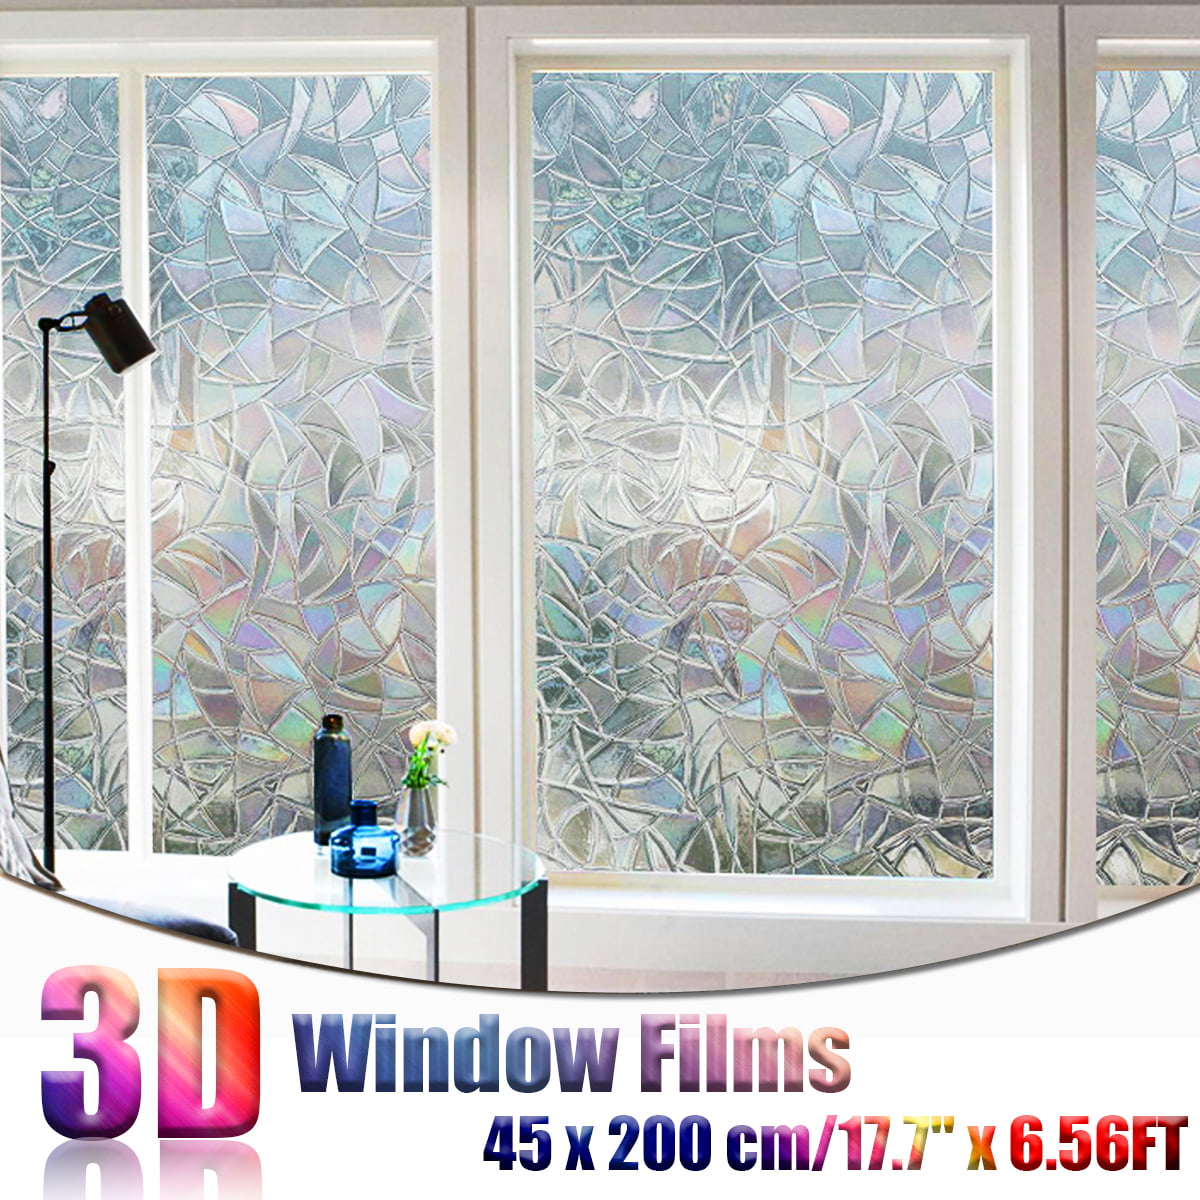 44.5 x 200cm 3D Privacy Window Frosted Film Bamboo Cling Pattern Films No Glue Self Adhesive Windows Stickers for Home Office Store Decoration UMI